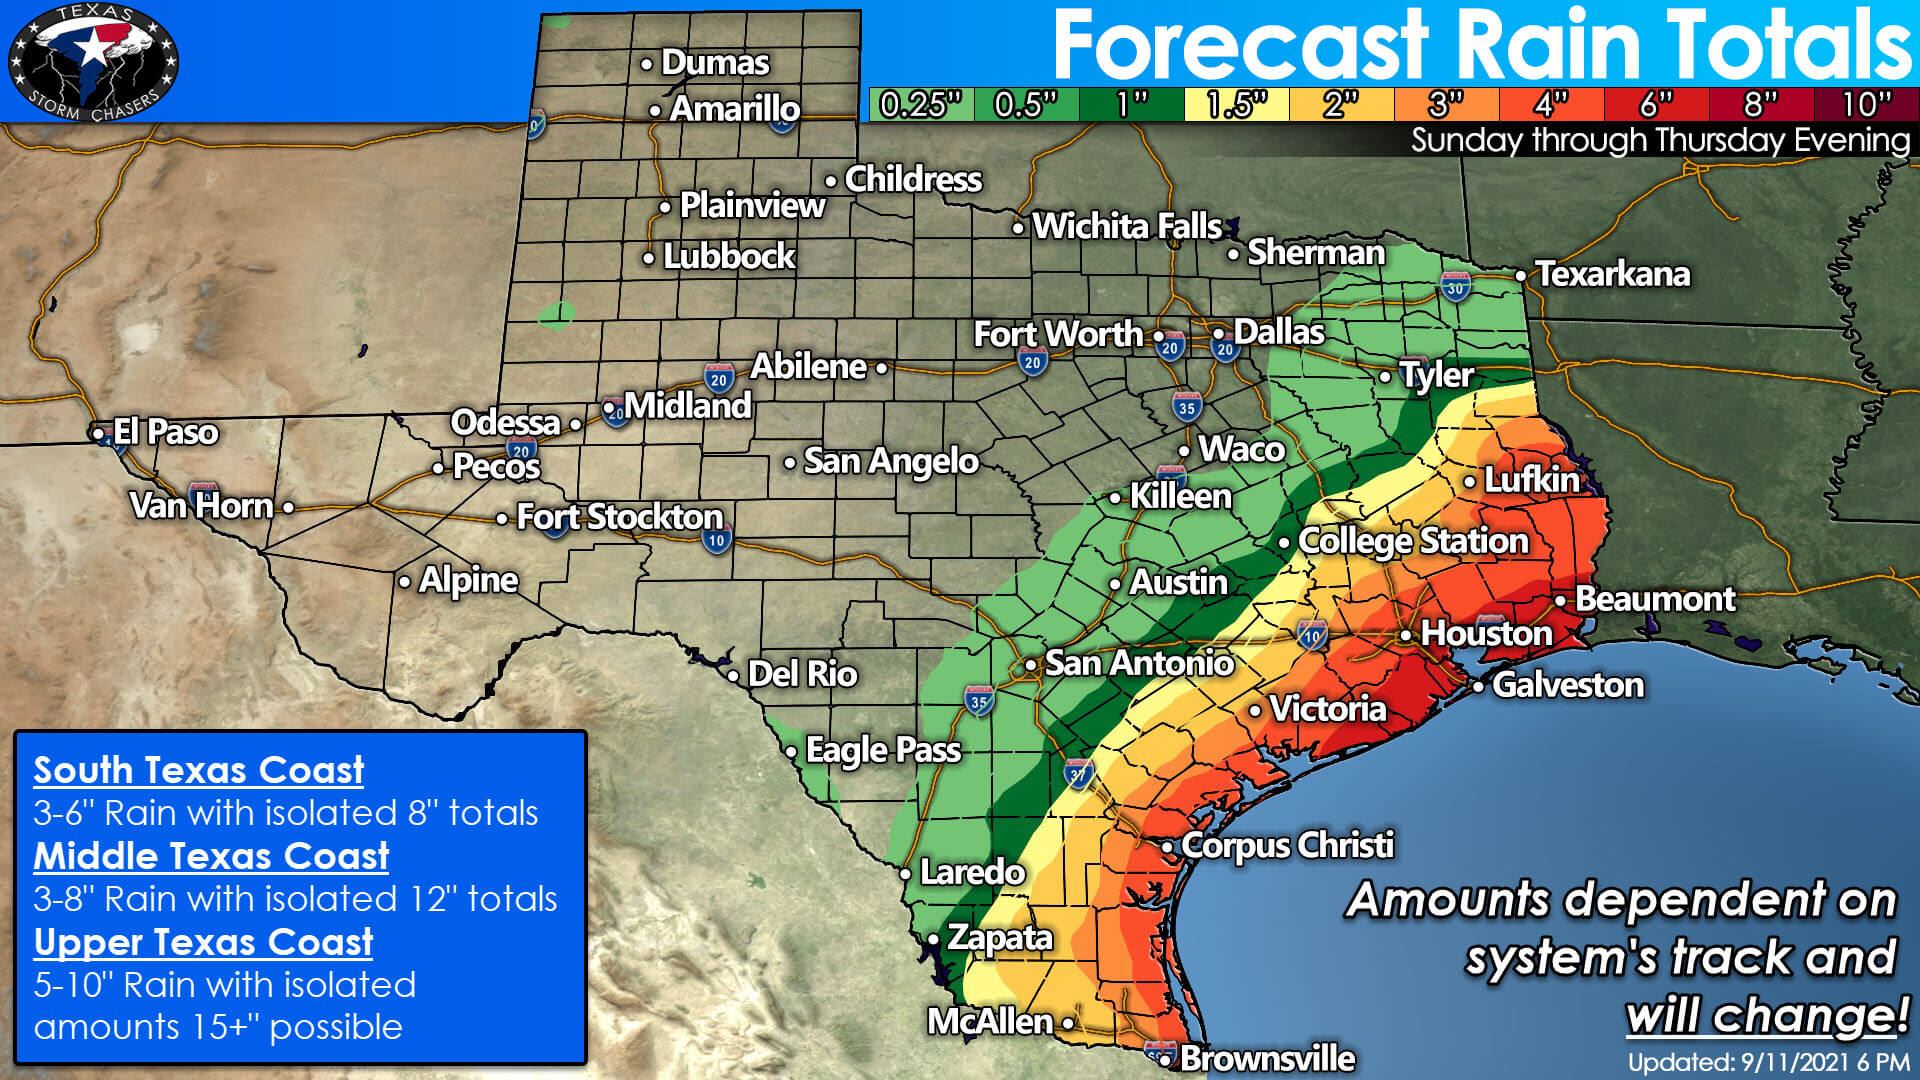 South Texas Coast 3-6" Rain with isolated 8" totals Middle Texas Coast 3-8" Rain with isolated 12" totals Upper Texas Coast 5-10" Rain with isolated amounts 15+" possible - Amounts dependent on system's track and will change!